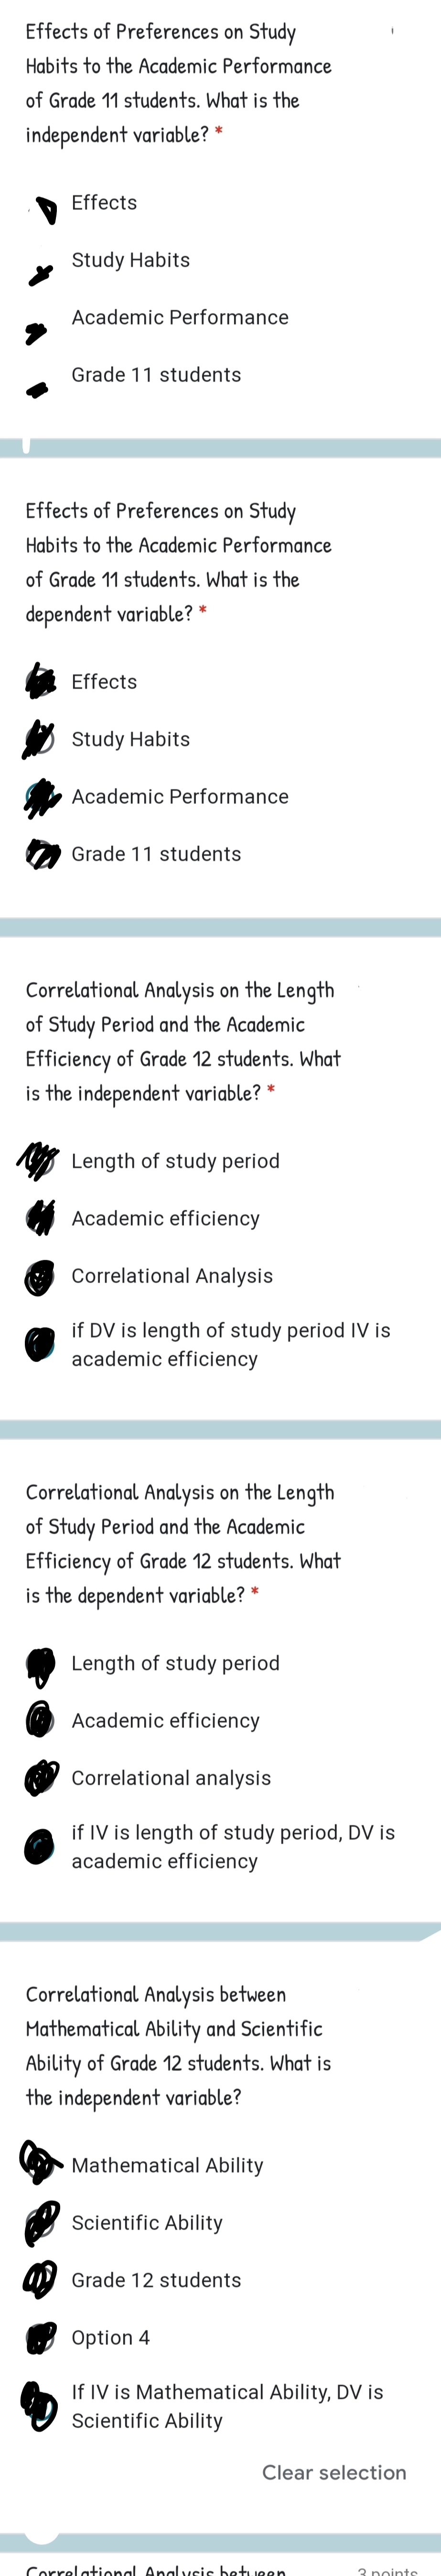 Effects of Preferences on Study
Habits to the Academic Performance
of Grade 11 students. What is the
independent variable? *
Effects
Study Habits
Academic Performance
Grade 11 students
Effects of Preferences on Study
Habits to the Academic Performance
of Grade 11 students. What is the
dependent variable?
Effects
O Study Habits
Academic Performance
Grade 11 students
Correlational Analysis on the Length
of Study Period and the Academic
Efficiency of Grade 12 students. What
is the independent variable?
Length of study period
Academic efficiency
Correlational Analysis
if DV is length of study period IV is
academic efficiency
Correlational Analysis on the Length
of Study Period and the Academic
Efficiency of Grade 12 students. What
is the dependent variable? *
Length of study period
Academic efficiency
Correlational analysis
if IV is length of study period, DV is
academic efficiency
Correlational Analysis between
Mathematical Ability and Scientific
Ability of Grade 12 students. What is
the independent variable?
Mathematical Ability
Scientific Ability
W Grade 12 students
Option 4
If IV is Mathematical Ability, DV is
Scientific Ability
Clear selection
Correlattional Anal ysis betueen
3 noints
